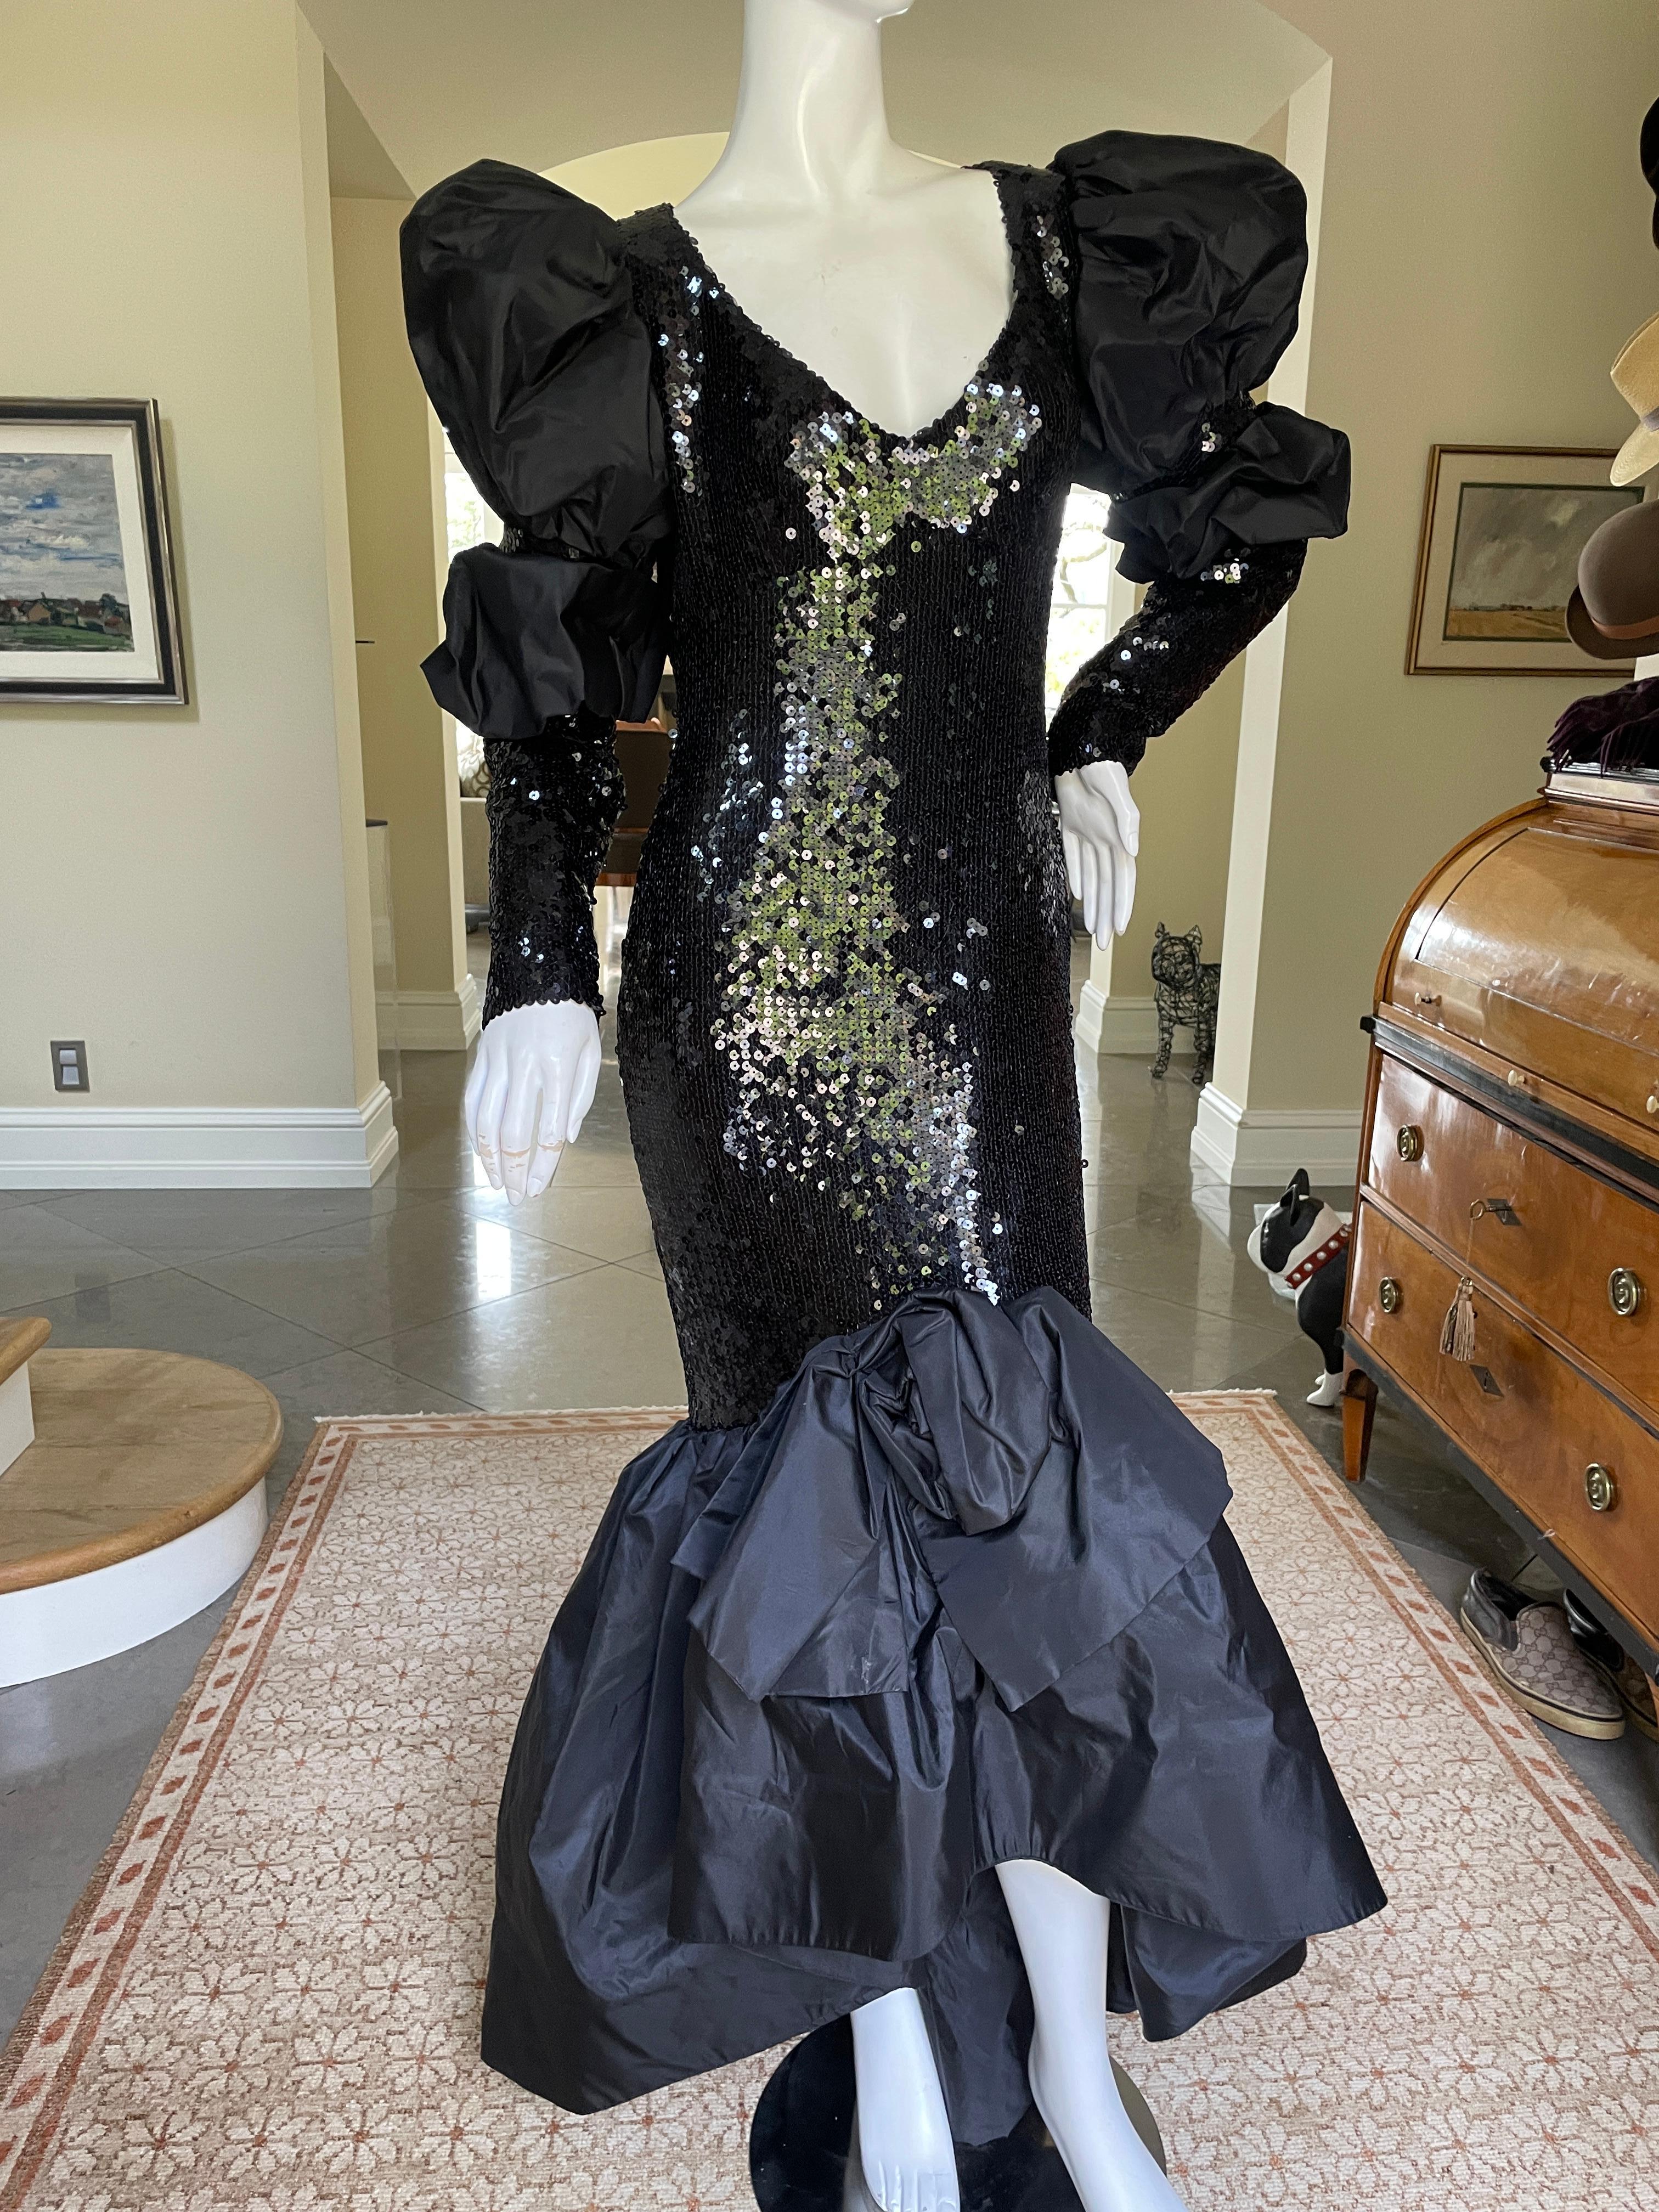 Loris Azzaro Couture Superb 1980's Black Sequin Mermaid Dress.
This is so wonderful, with bold shoulder sleeves and sequin arms, just amazing.
 No size tag, estimate French size 44
 Bust 36